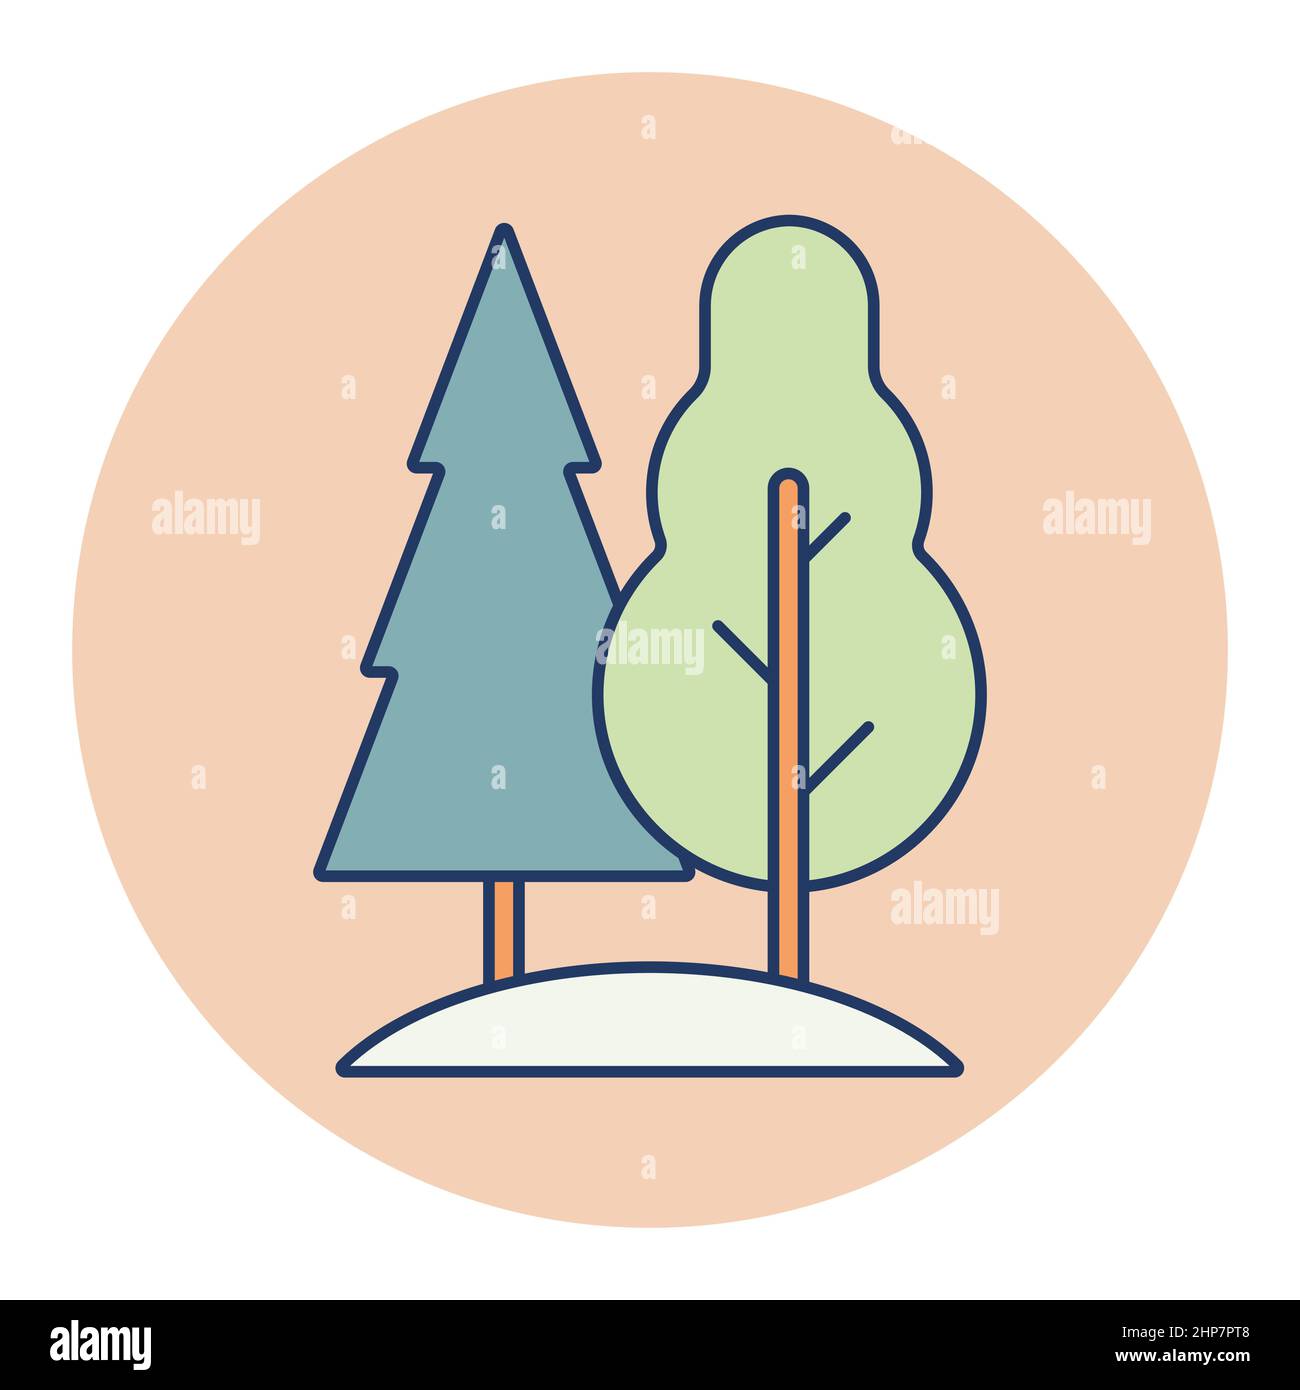 Deciduous and conifer forest vector icon Stock Vector